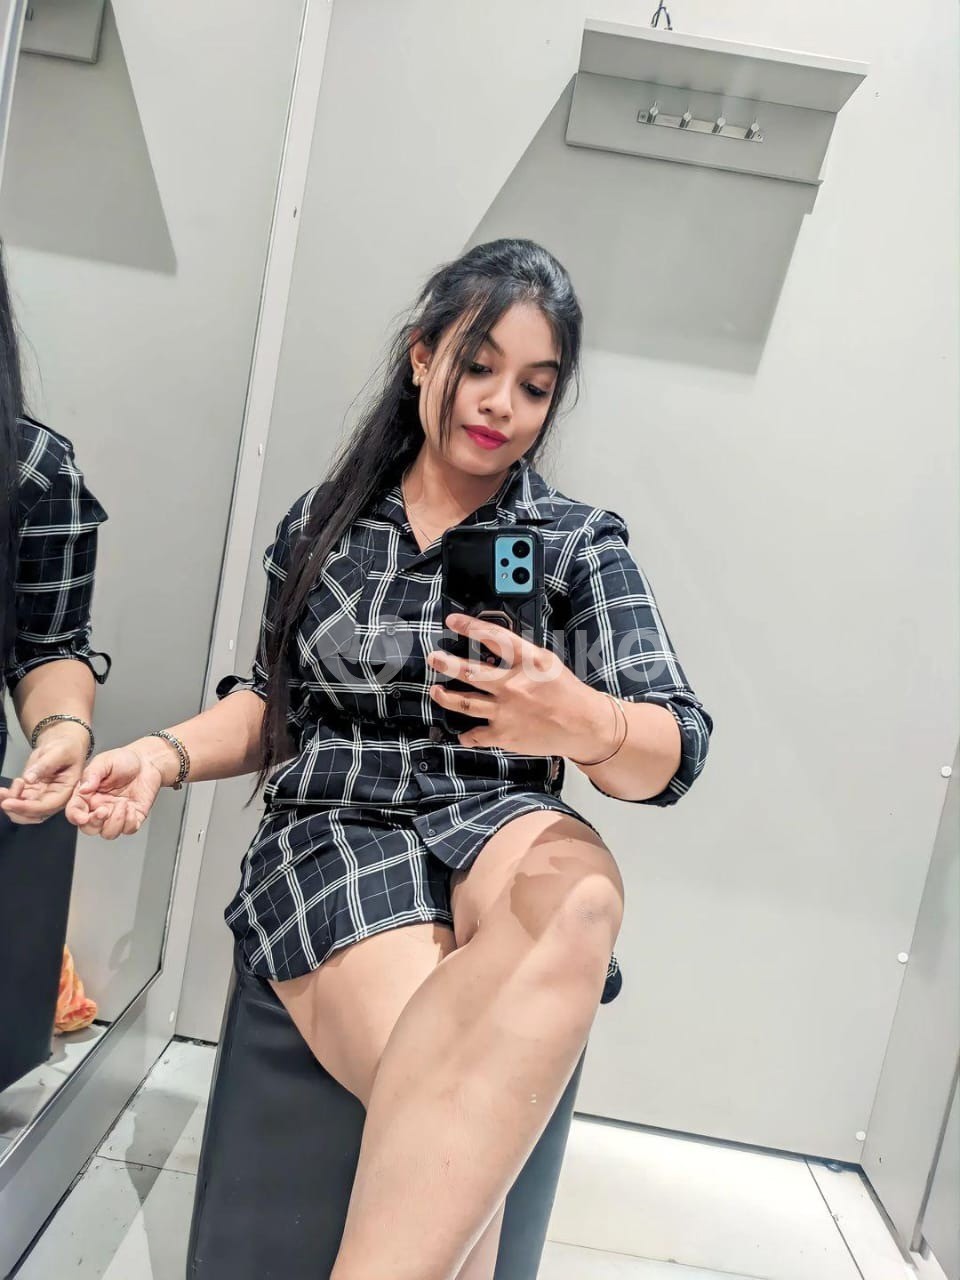 UTTAM NAGAR 🛣️⭐VIP TODAY LOW PRICE )ESCORT 🥰SERVICE 100% SAFE AND SECURE ANYTIME CALL ME 24 X 7 SERVICE AVAILA